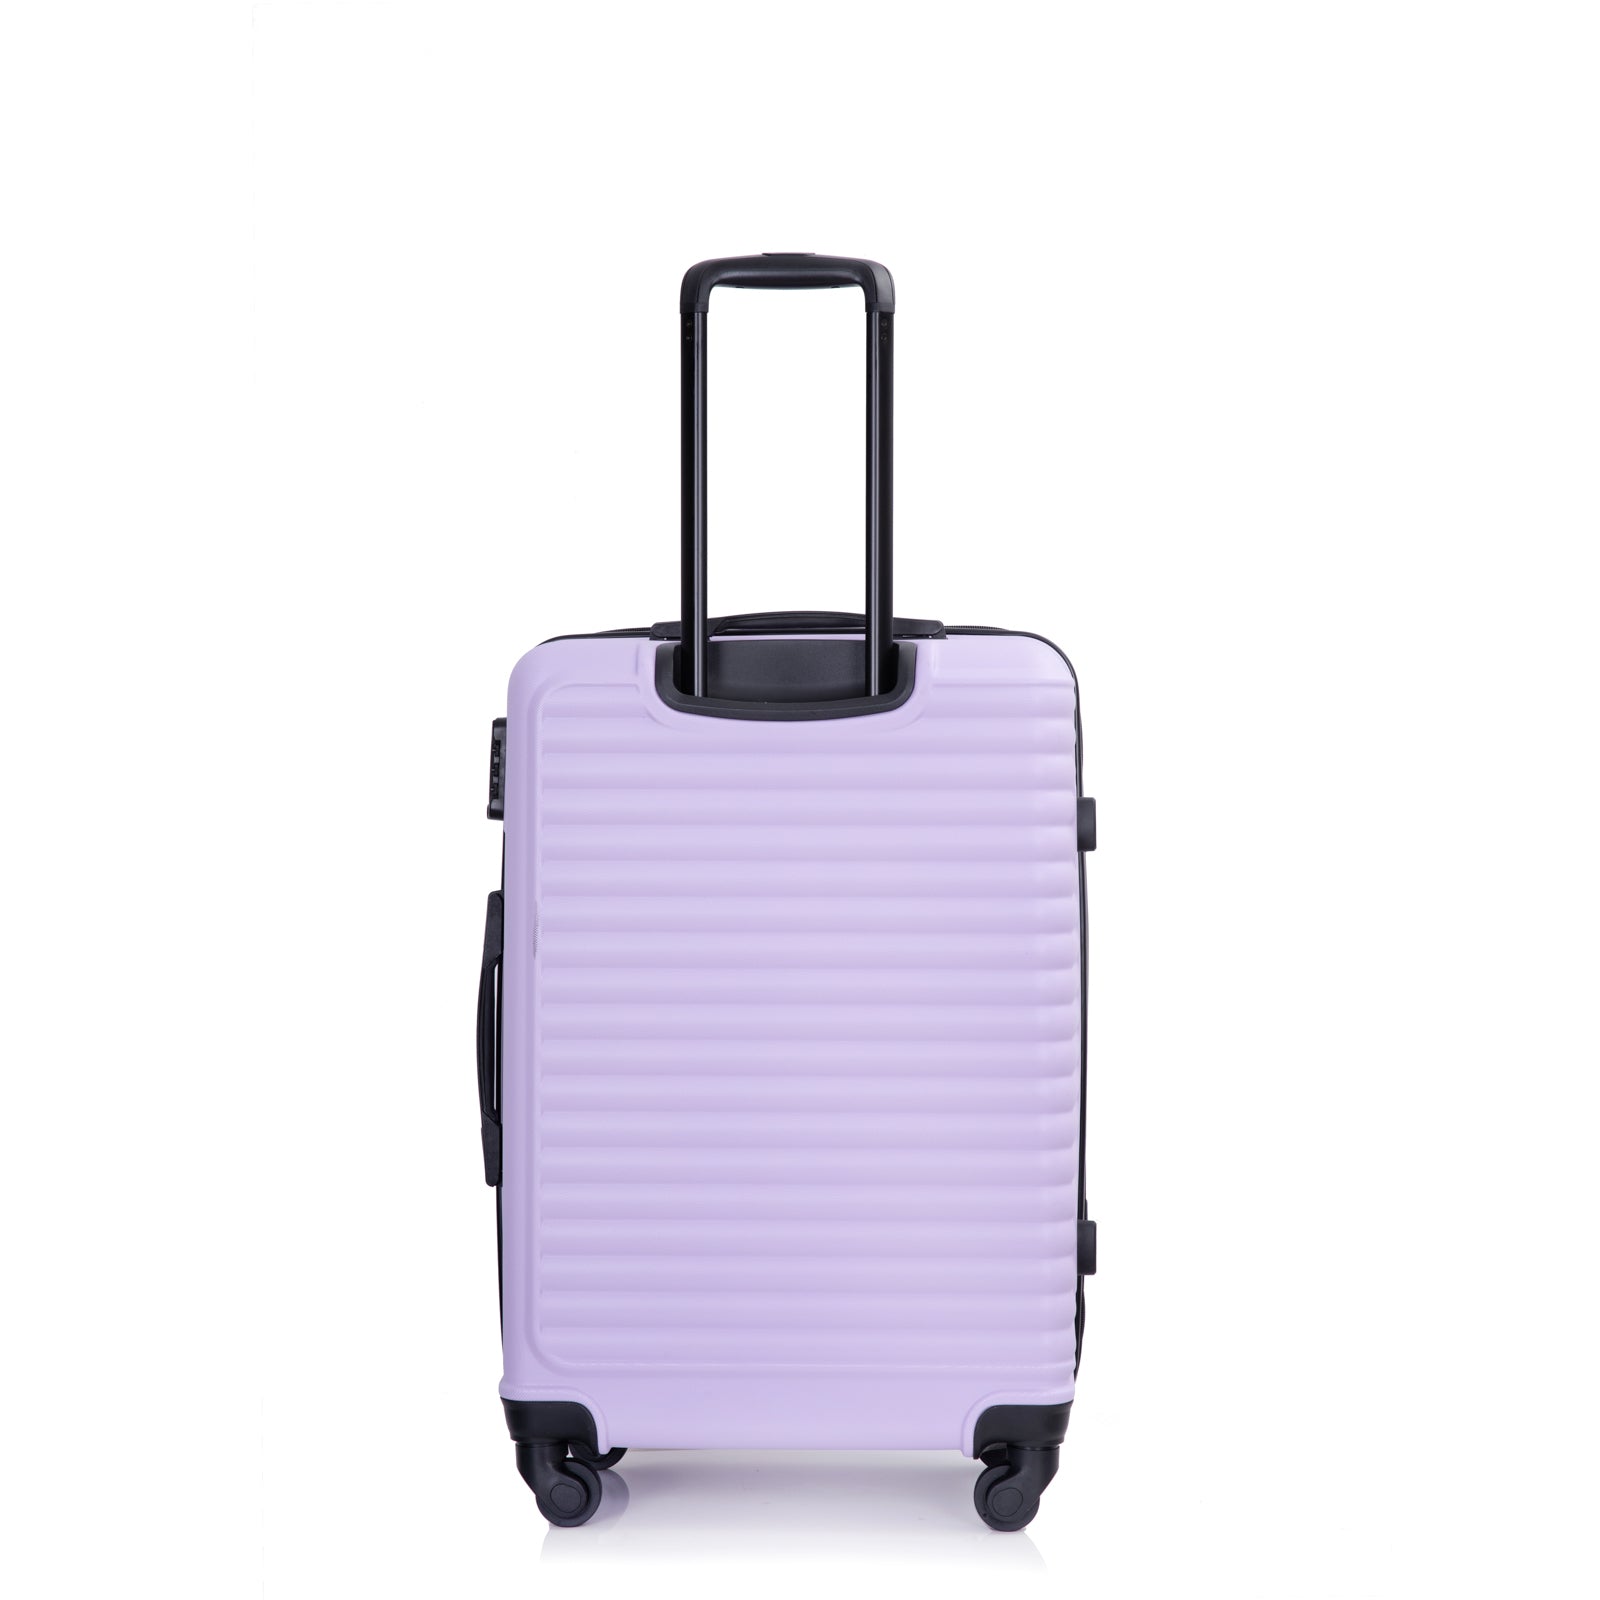 3 Piece Luggage Sets ABS Lightweight Suitcase with Two lavender purple-abs